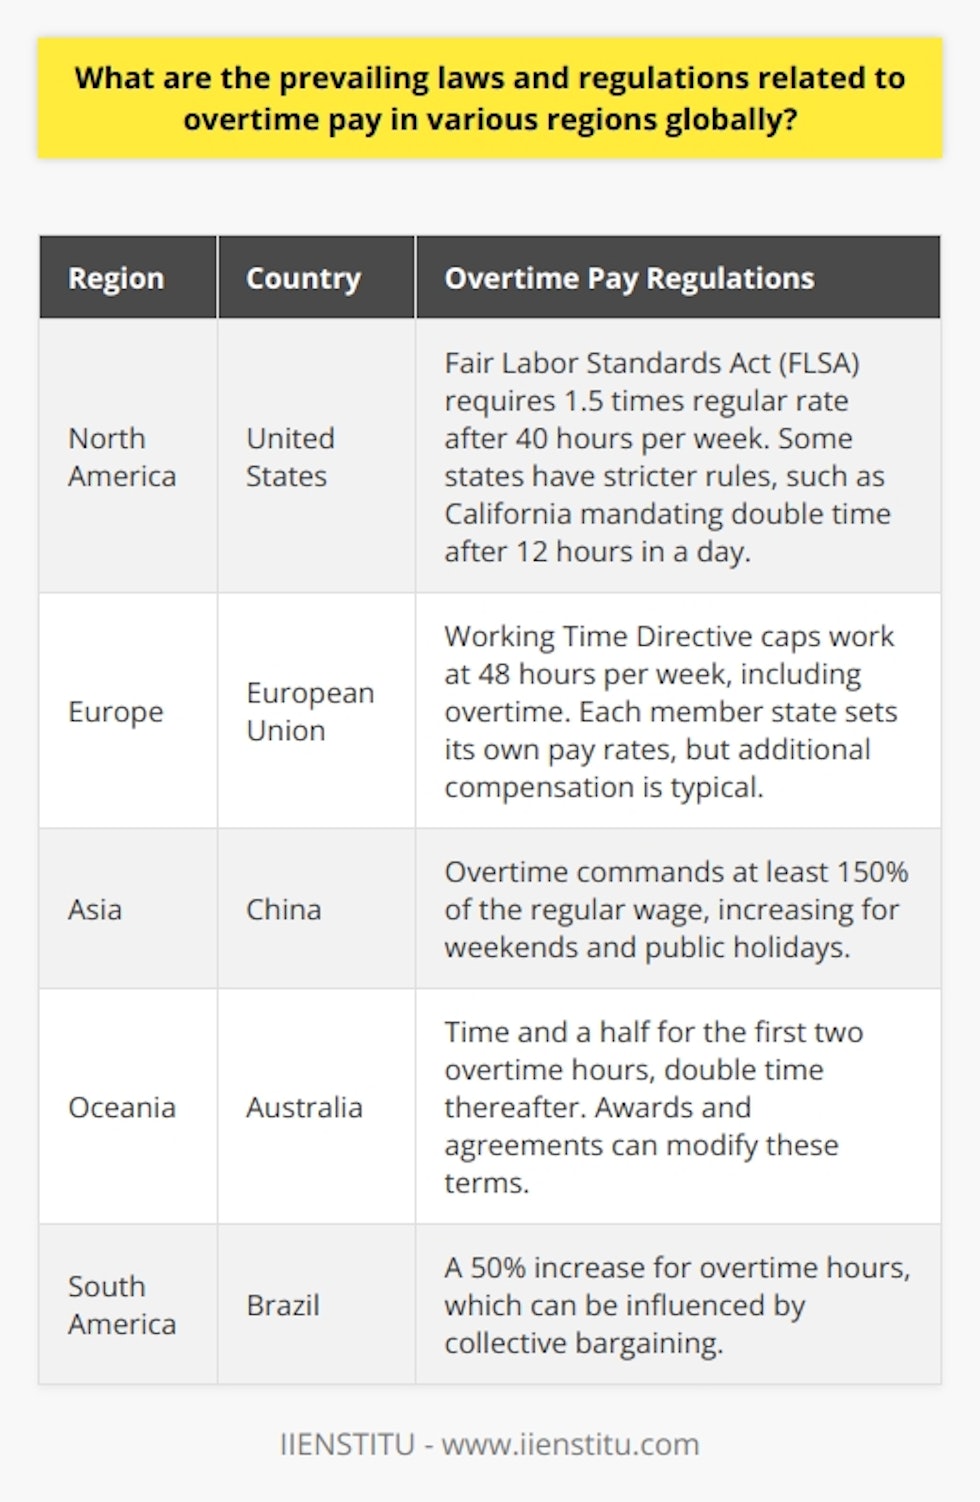 Global Overtime Pay Laws North America United States In the US, the  Fair Labor Standards Act (FLSA)  sets overtime pay requirements. Workers earn one and a half times their regular rate after 40 work hours weekly. Certain states impose stricter rules. California mandates double time after 12 hours in a day. Canada Canadas regulation varies by province. Generally, employees receive one and a half times their standard rate after 44 hours weekly. However, some sectors have unique rules. Europe European Union The  Working Time Directive  governs overtime in the EU. It caps work at 48 hours weekly, including overtime. Each member sets its own pay rates, but additional compensation is typical. United Kingdom Now outside the EU, the UKs laws resemble the Working Time Directive. Overtime pay is not mandatory unless stipulated in the employment contract. Asia China Chinese labor law states that overtime commands at least 150% of the regular wage. This rate increases for weekends and public holidays. Japan In Japan, overtime pay rates must exceed the regular pay by at least 25%. Recent reforms aim to curb excessive working hours. Oceania Australia Australia requires time and a half for the first two overtime hours. Double time applies thereafter. Awards and agreements can modify these terms. New Zealand New Zealand does not enforce a standard overtime rate. Contractors negotiate overtime as part of individual employment agreements. South America Brazil Brazilian law prescribes a 50% increase for overtime hours. Collective bargaining can influence these rates. Argentina In Argentina, overtime work earns a 50% premium on weekdays and 100% on Sundays. Africa South Africa In South Africa, overtime compensation is one and a half times the normal wage rate. Such pay applies to hours beyond 45 per week. Nigeria Nigerian workers receive at least time and a half for overtime. Some industries set higher rates through collective bargaining. Middle East United Arab Emirates The UAE mandates a 25% increase for day overtime. Night overtime reaches a 50% increase. Saudi Arabia Saudi Arabia requires payment of one and a half times the regular rate for overtime. Factors Influencing Overtime Laws -  Local labor laws -  Collective bargaining agreements -  Sector-specific regulations -  Public holidays and weekends Conclusion Each region upholds distinct laws for overtime pay. Workers must know their rights. Employers should comply with these laws to foster fairness and avoid legal issues. Consideration of international laws is key for global businesses.